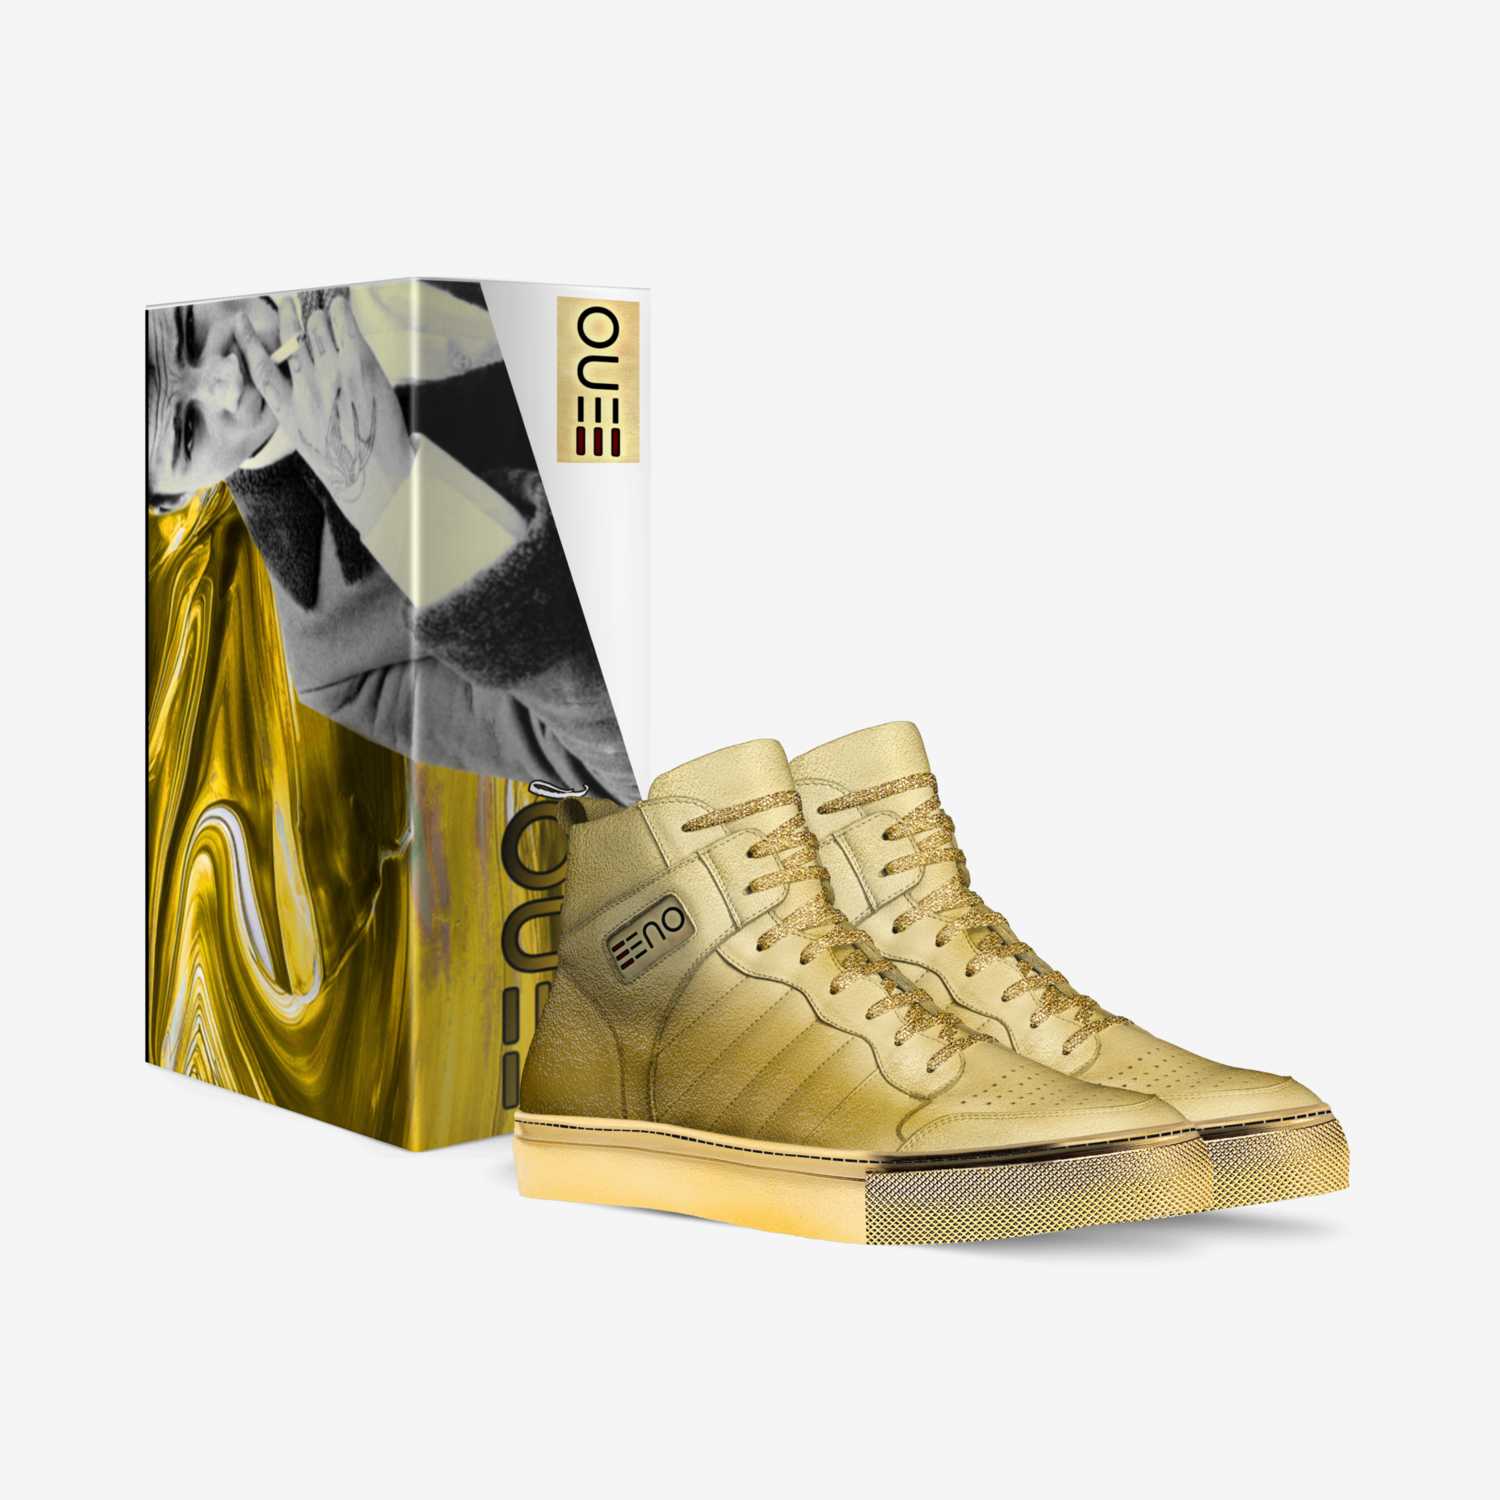 ENO ETERNAL  custom made in Italy shoes by Redstar Mafia | Box view